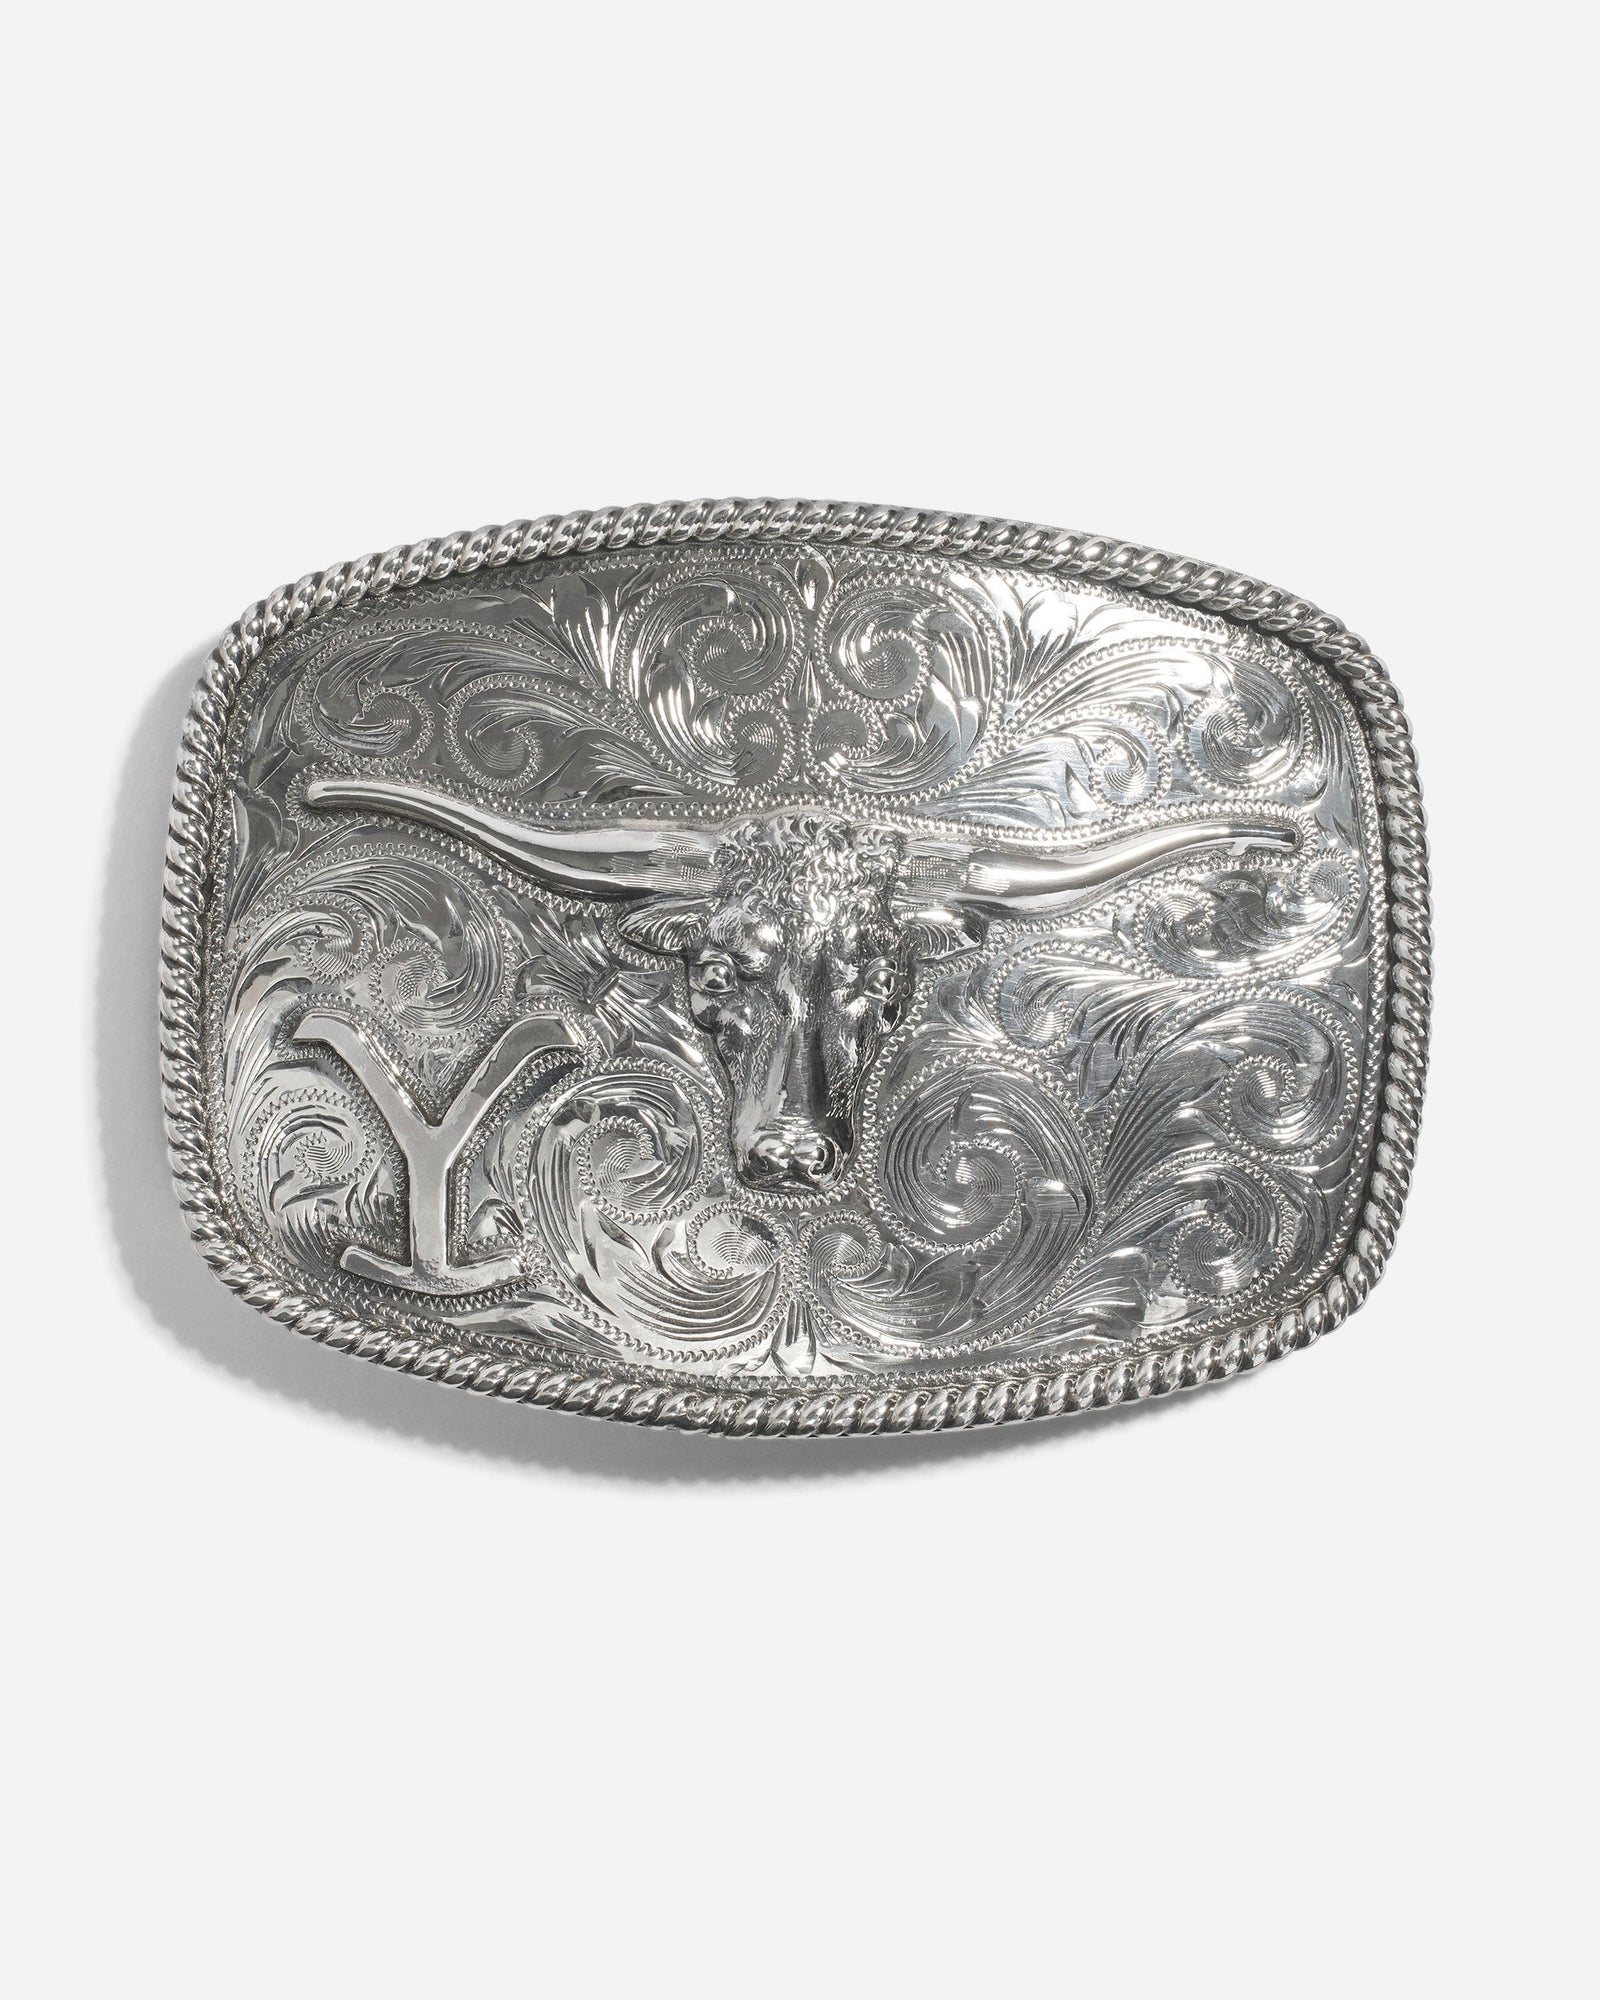 John Dutton's Hand Engraved Yellowstone Steer Buckle